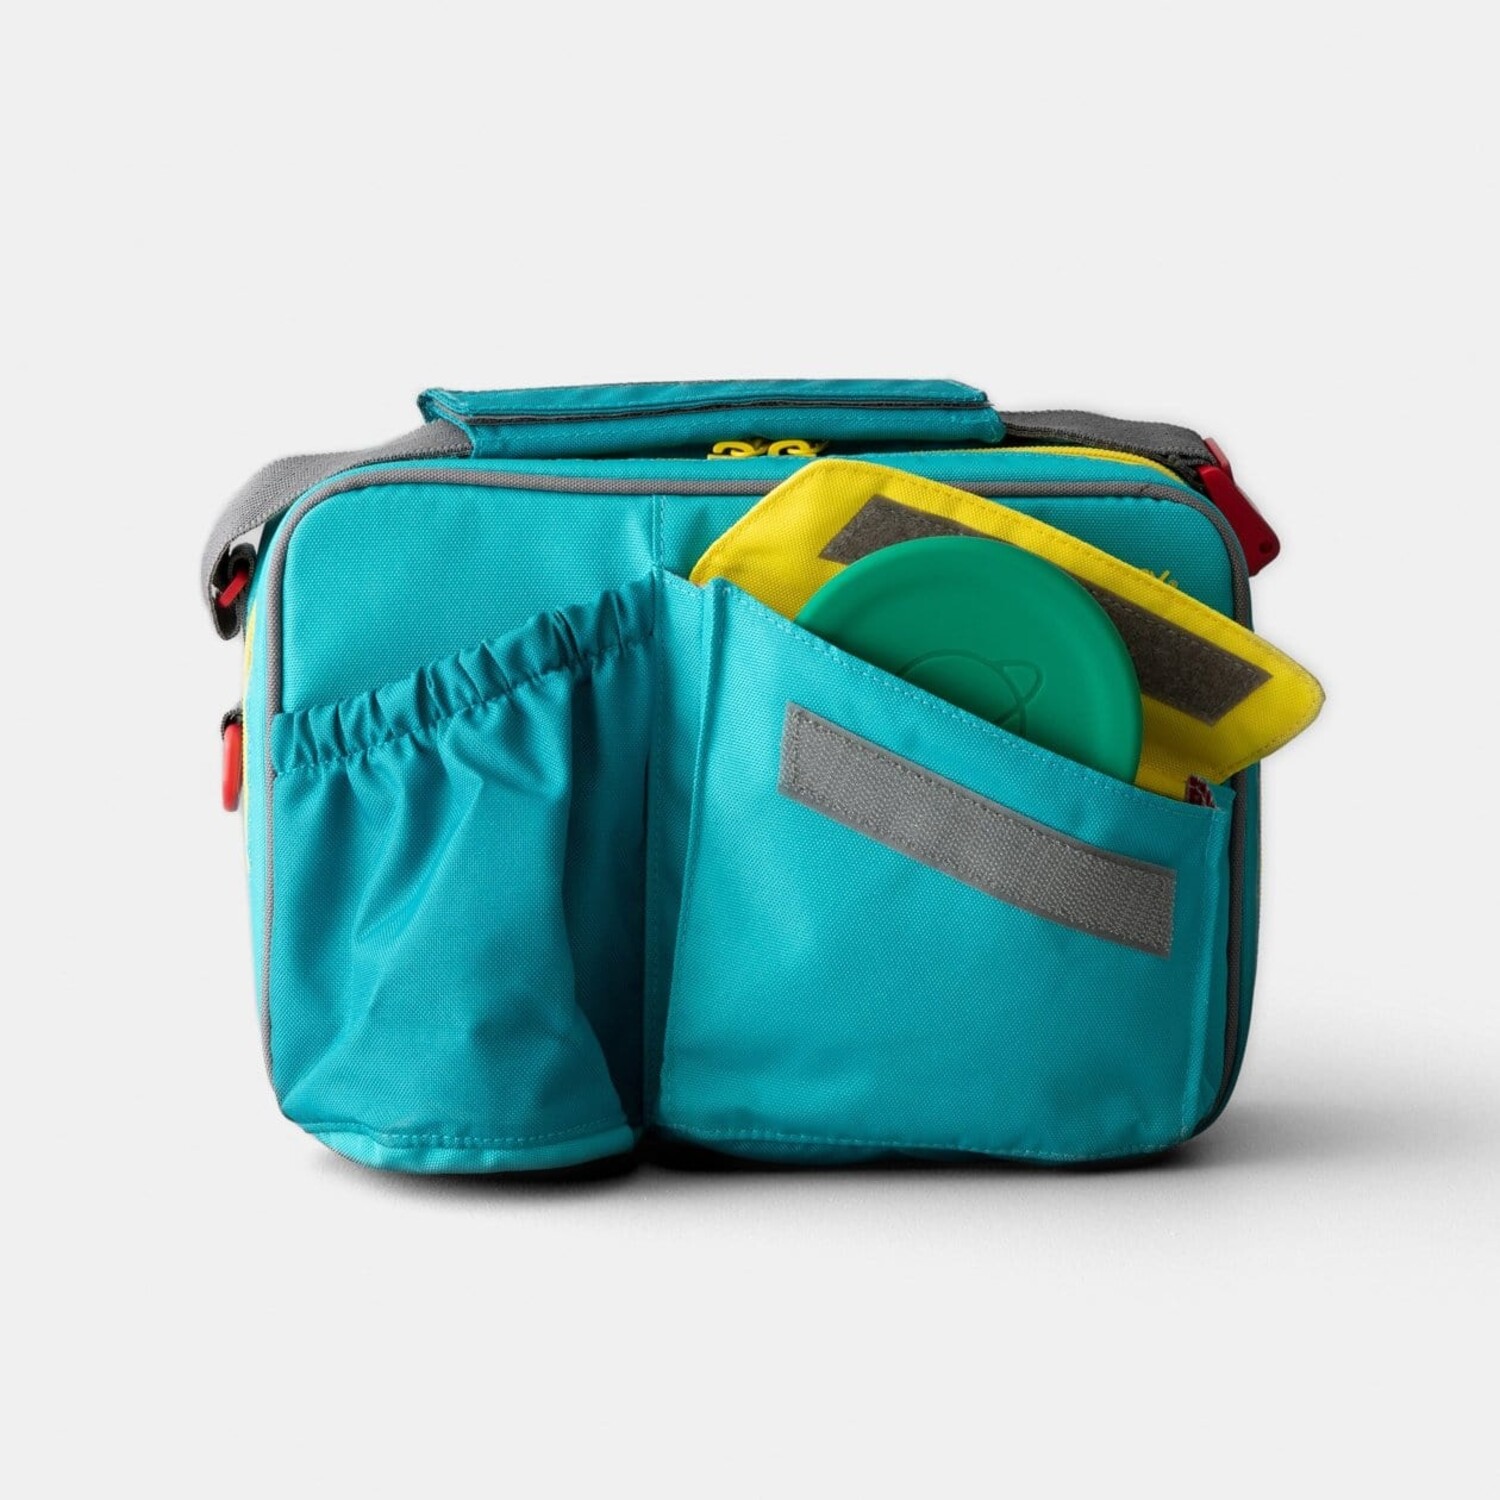 PlanetBox Rover Lunchbox & Carry Bag Set